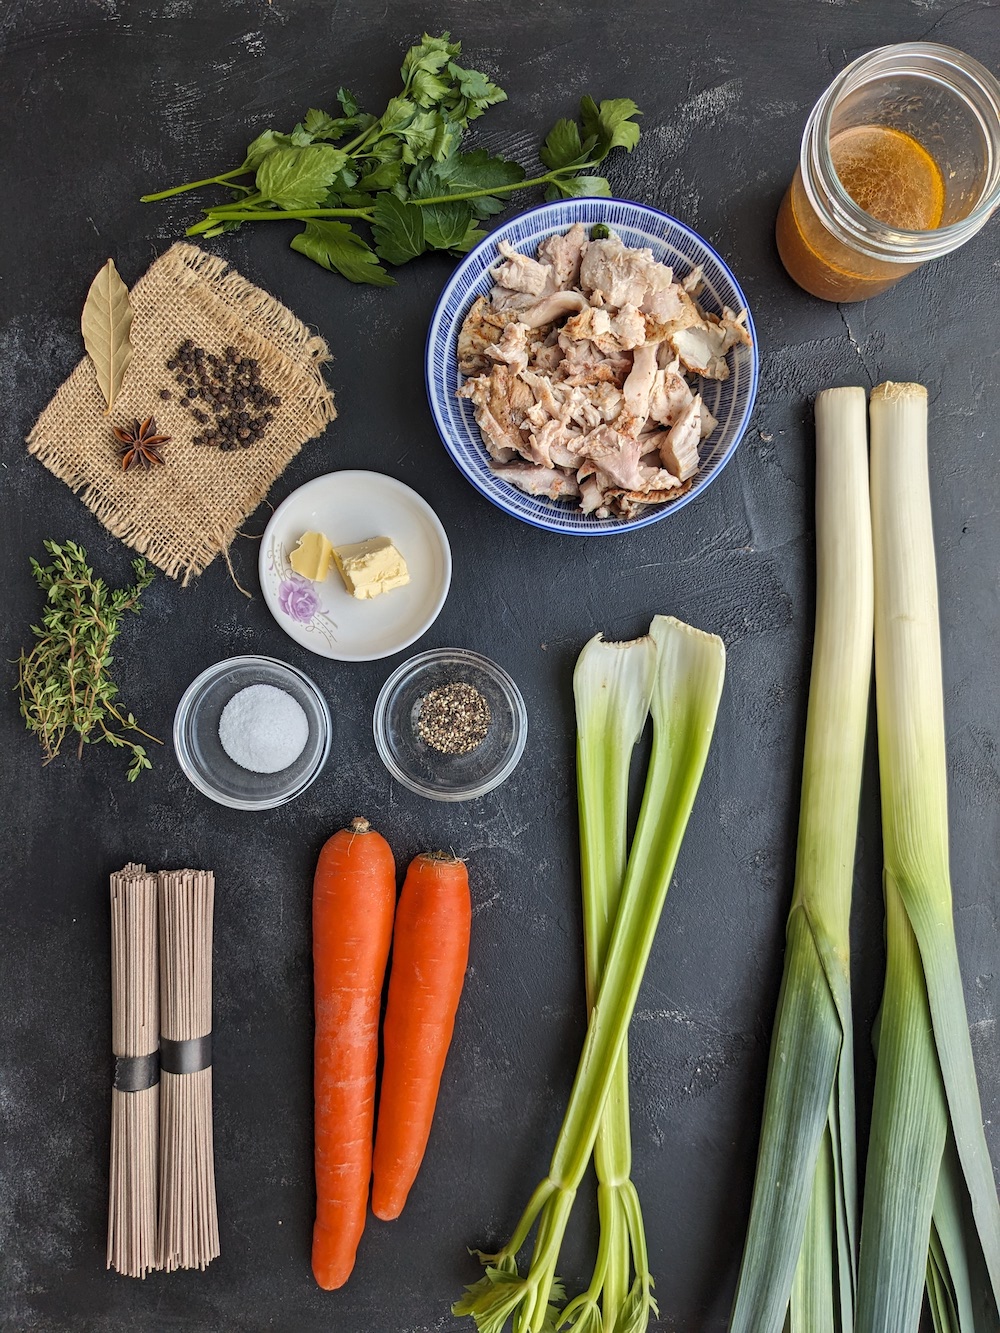 Chicken Leek Soup with Soba Noodles - Ingredients